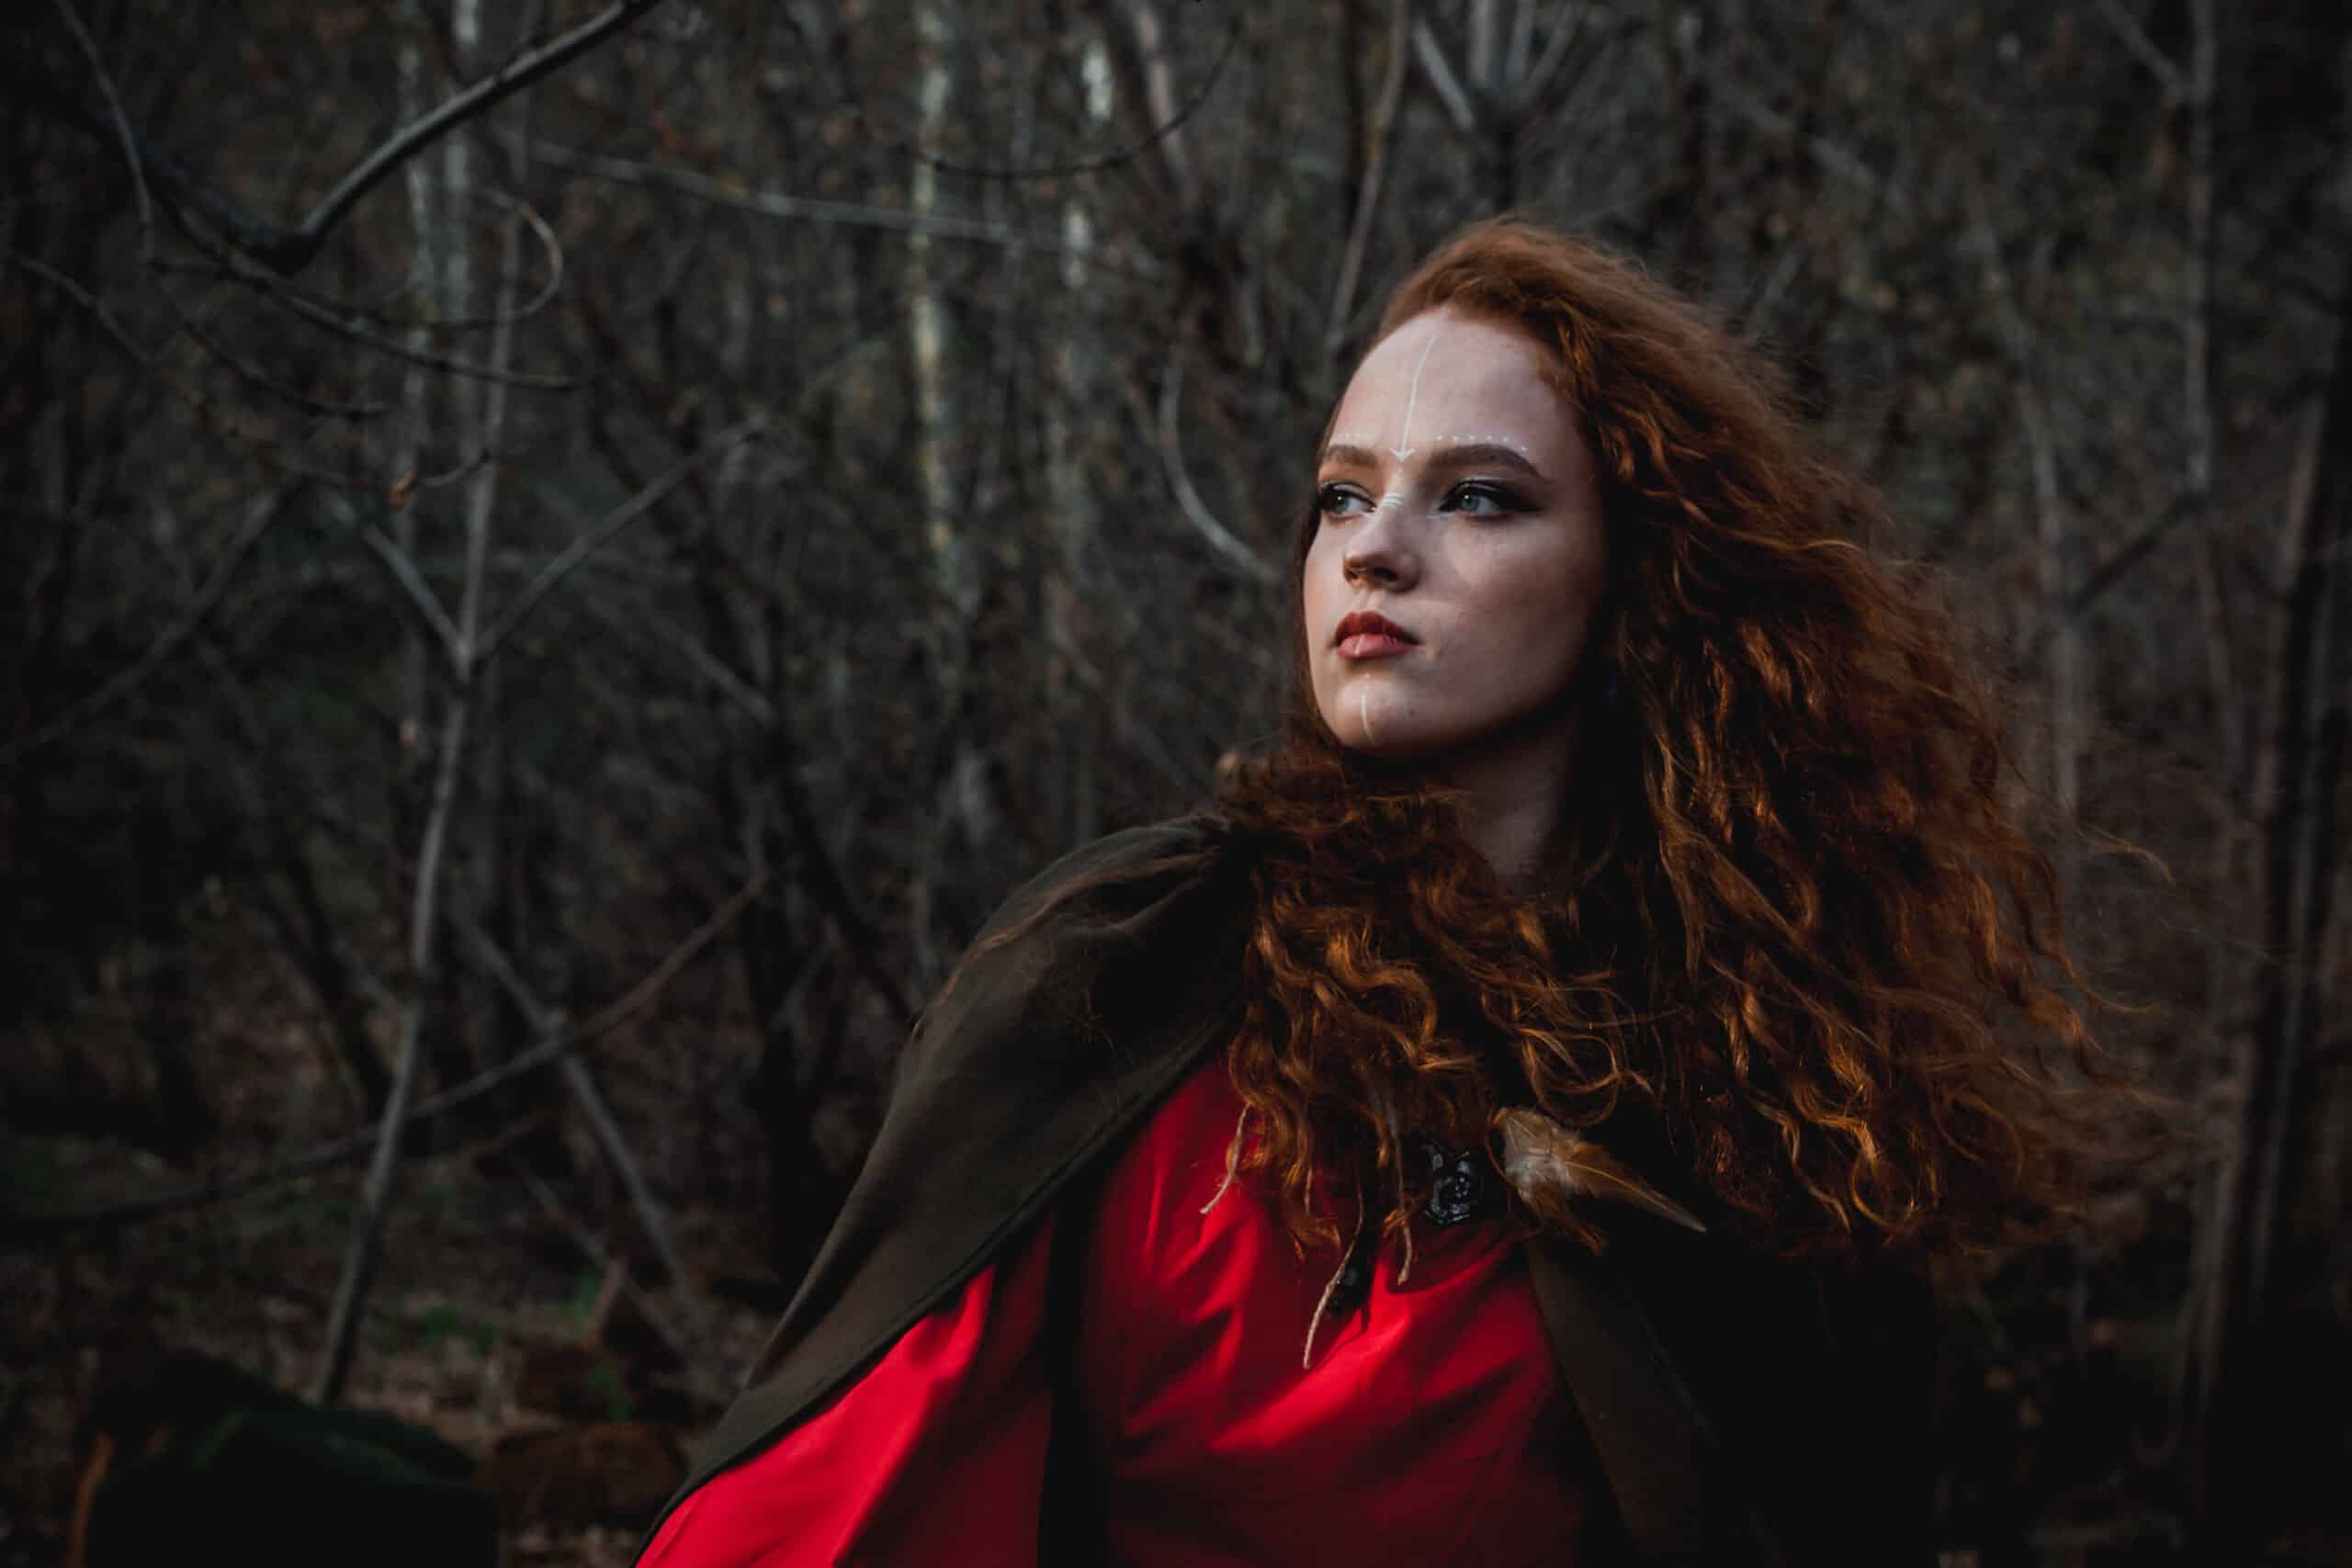 Red-haired woman in a red dress in a historical Celtic dress.